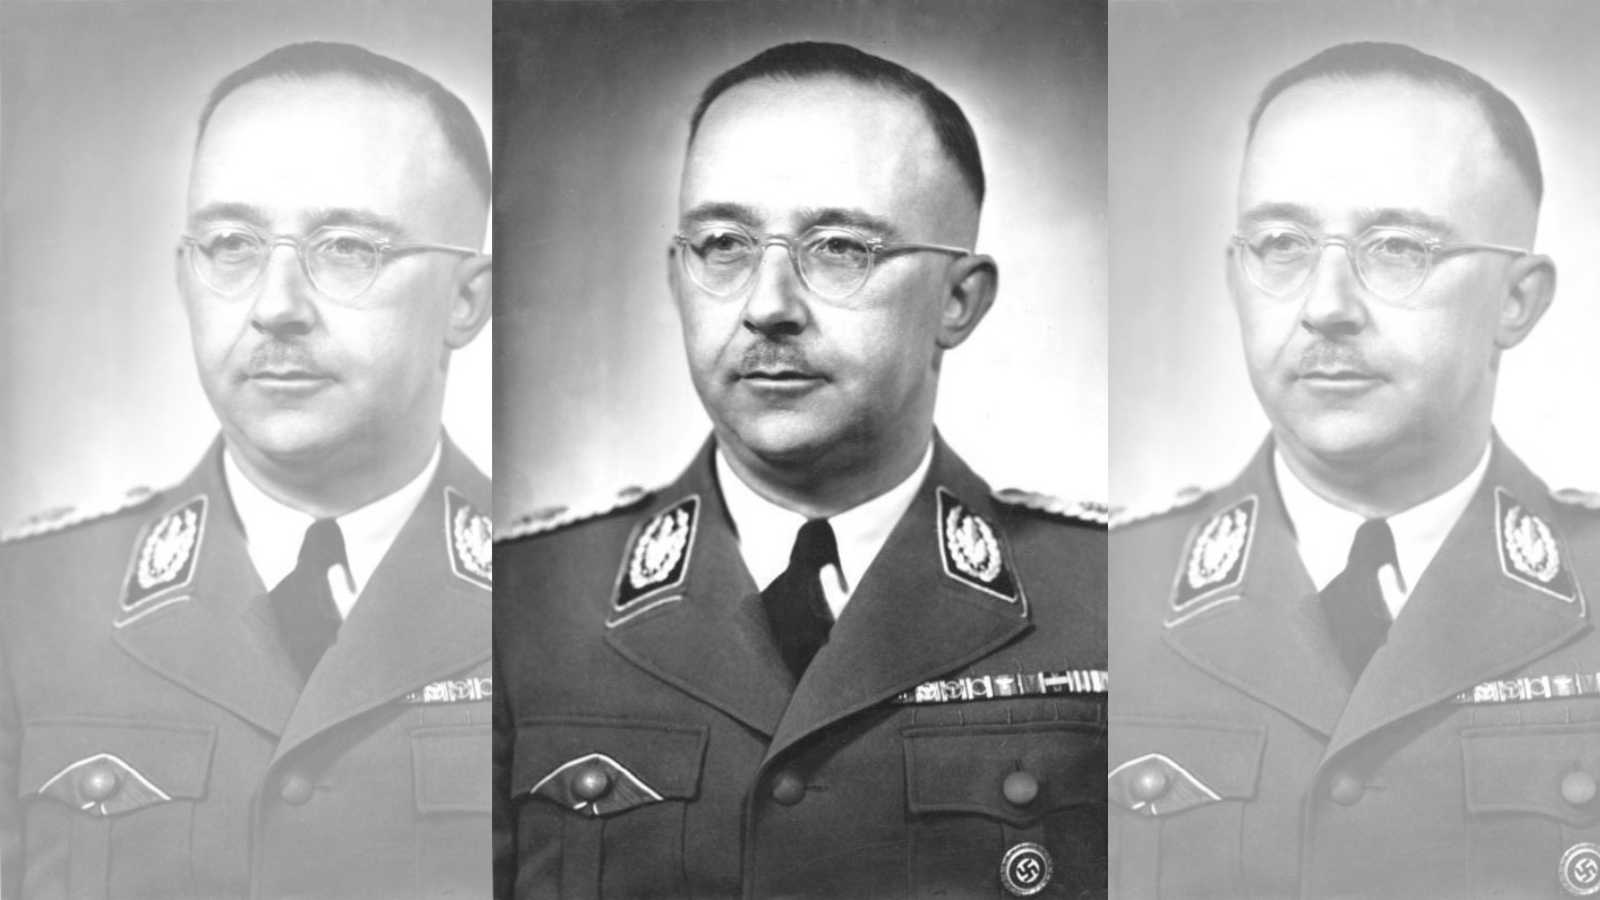 <p>Heinrich Himmler, head of the Schutzstaffel (S.S.), was also in charge of Army Group Vistula, 500,000 soldiers protecting Berlin. However, Himmler either found it stressful or was just lazy. He required massages and naps and <a href="https://www.kindafrugal.com/surviving-and-thriving-despite-reduced-work-hours/">worked just a few hours</a> daily. When Army Group Vistula was overrun, he abandoned his post and went to the Hohenlychen Sanatorium spa.</p>